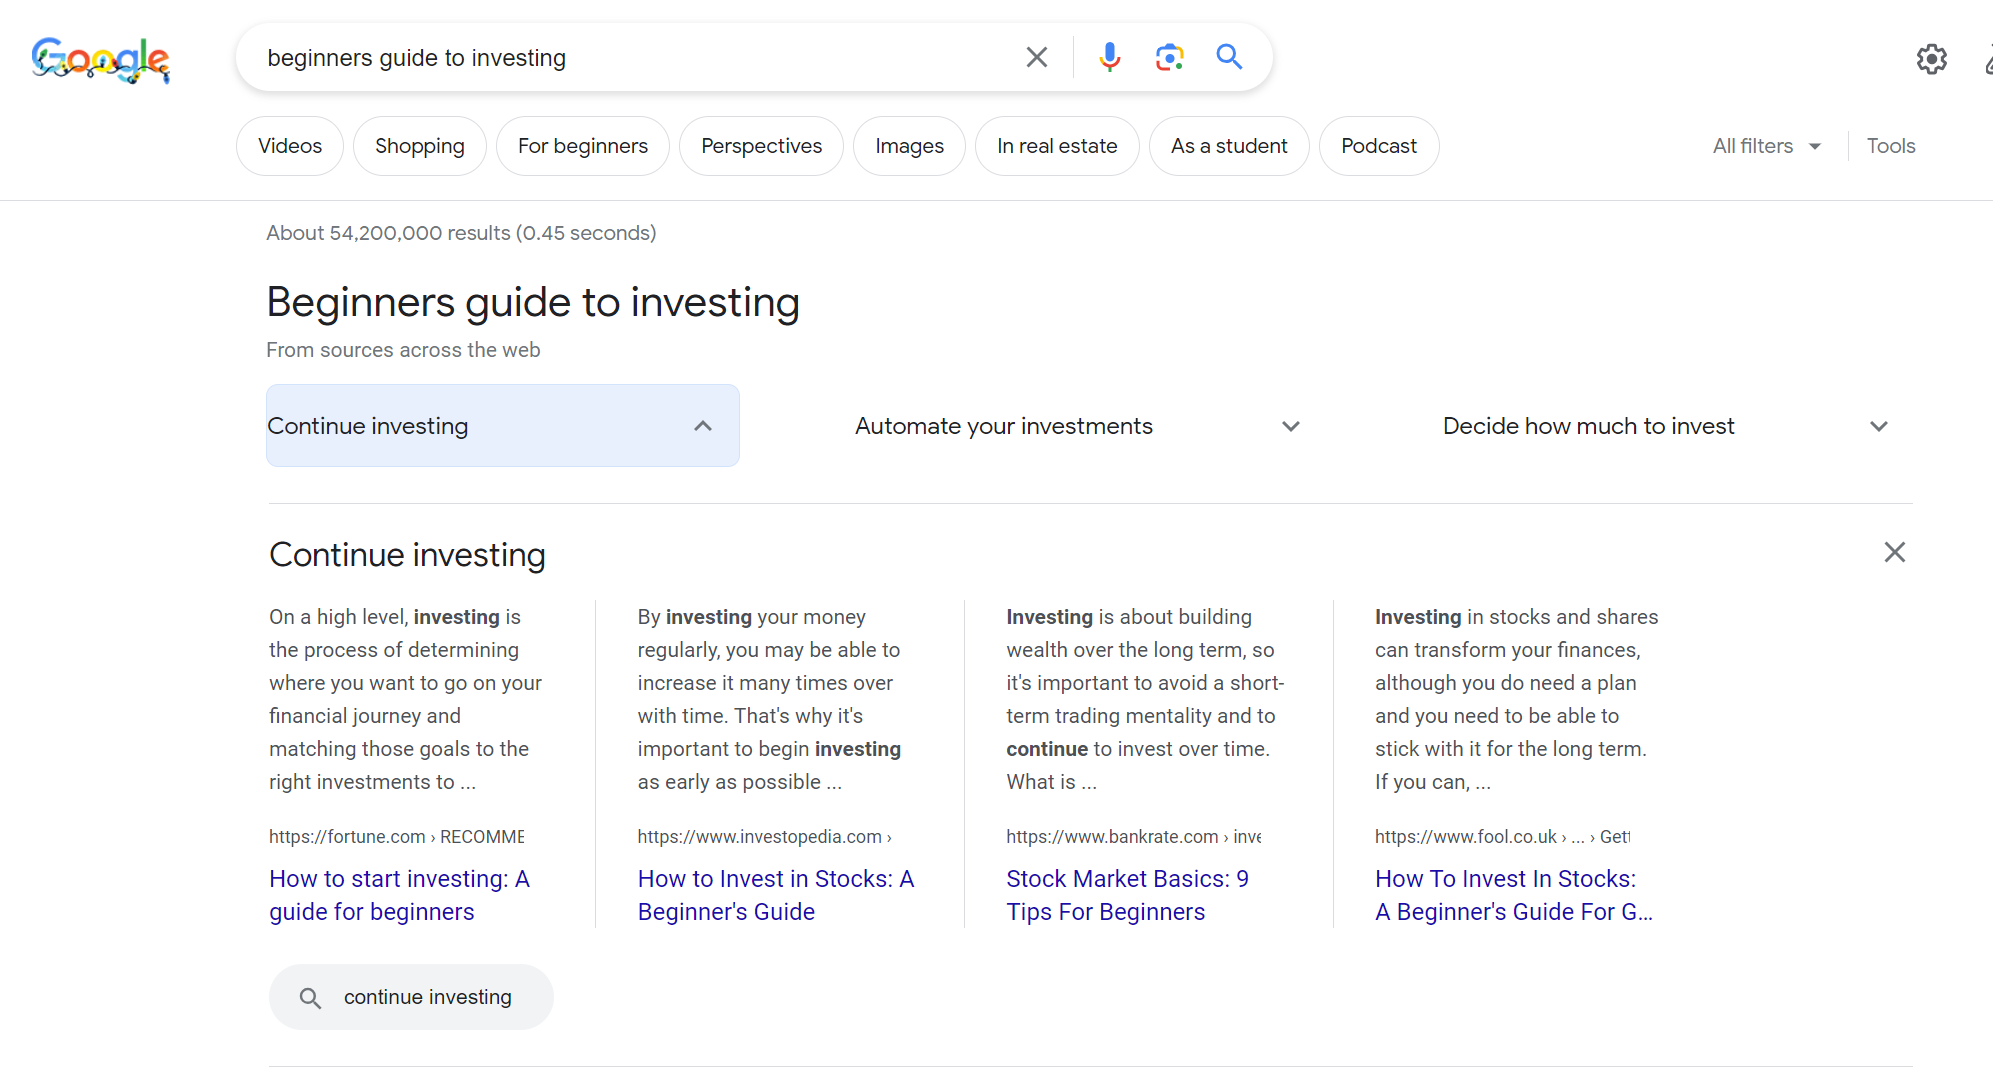 search for [beginners guide to investing]